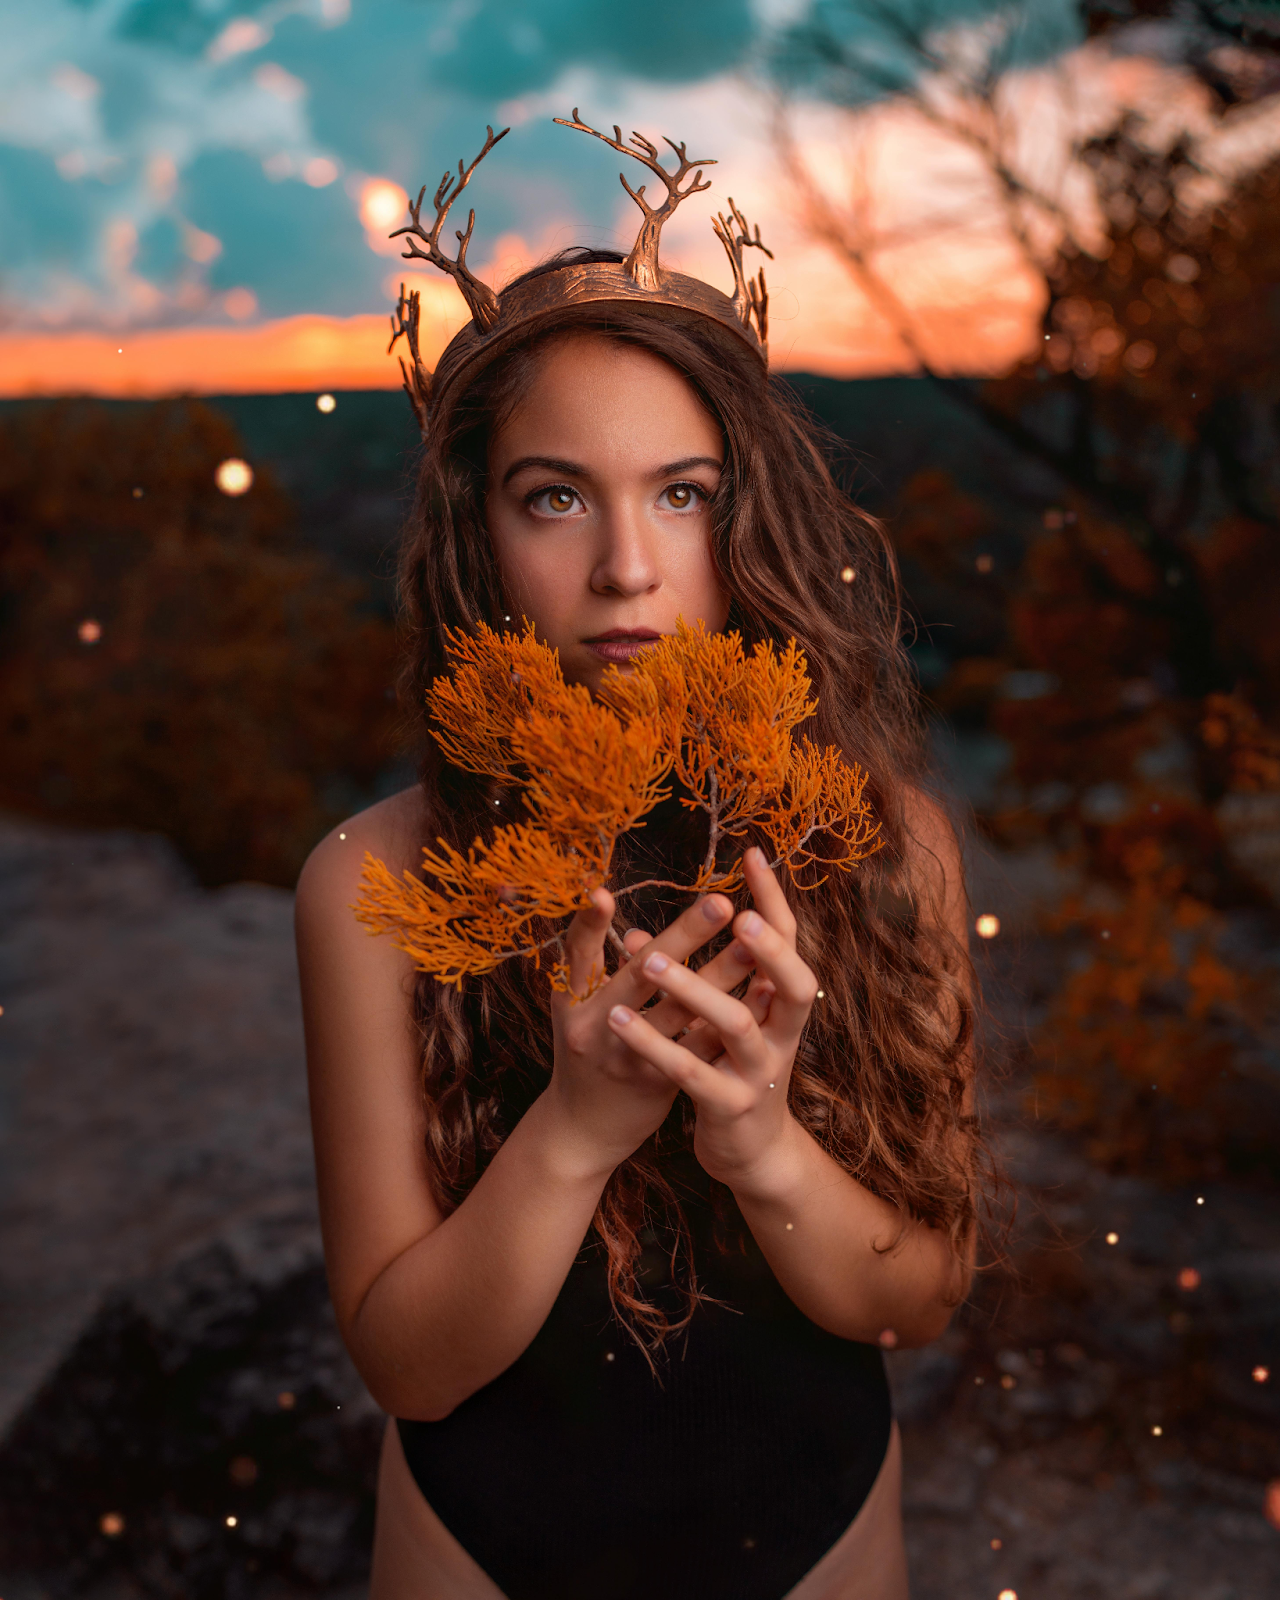 Stunning Girl With Crown on Head and Flowers in Hand